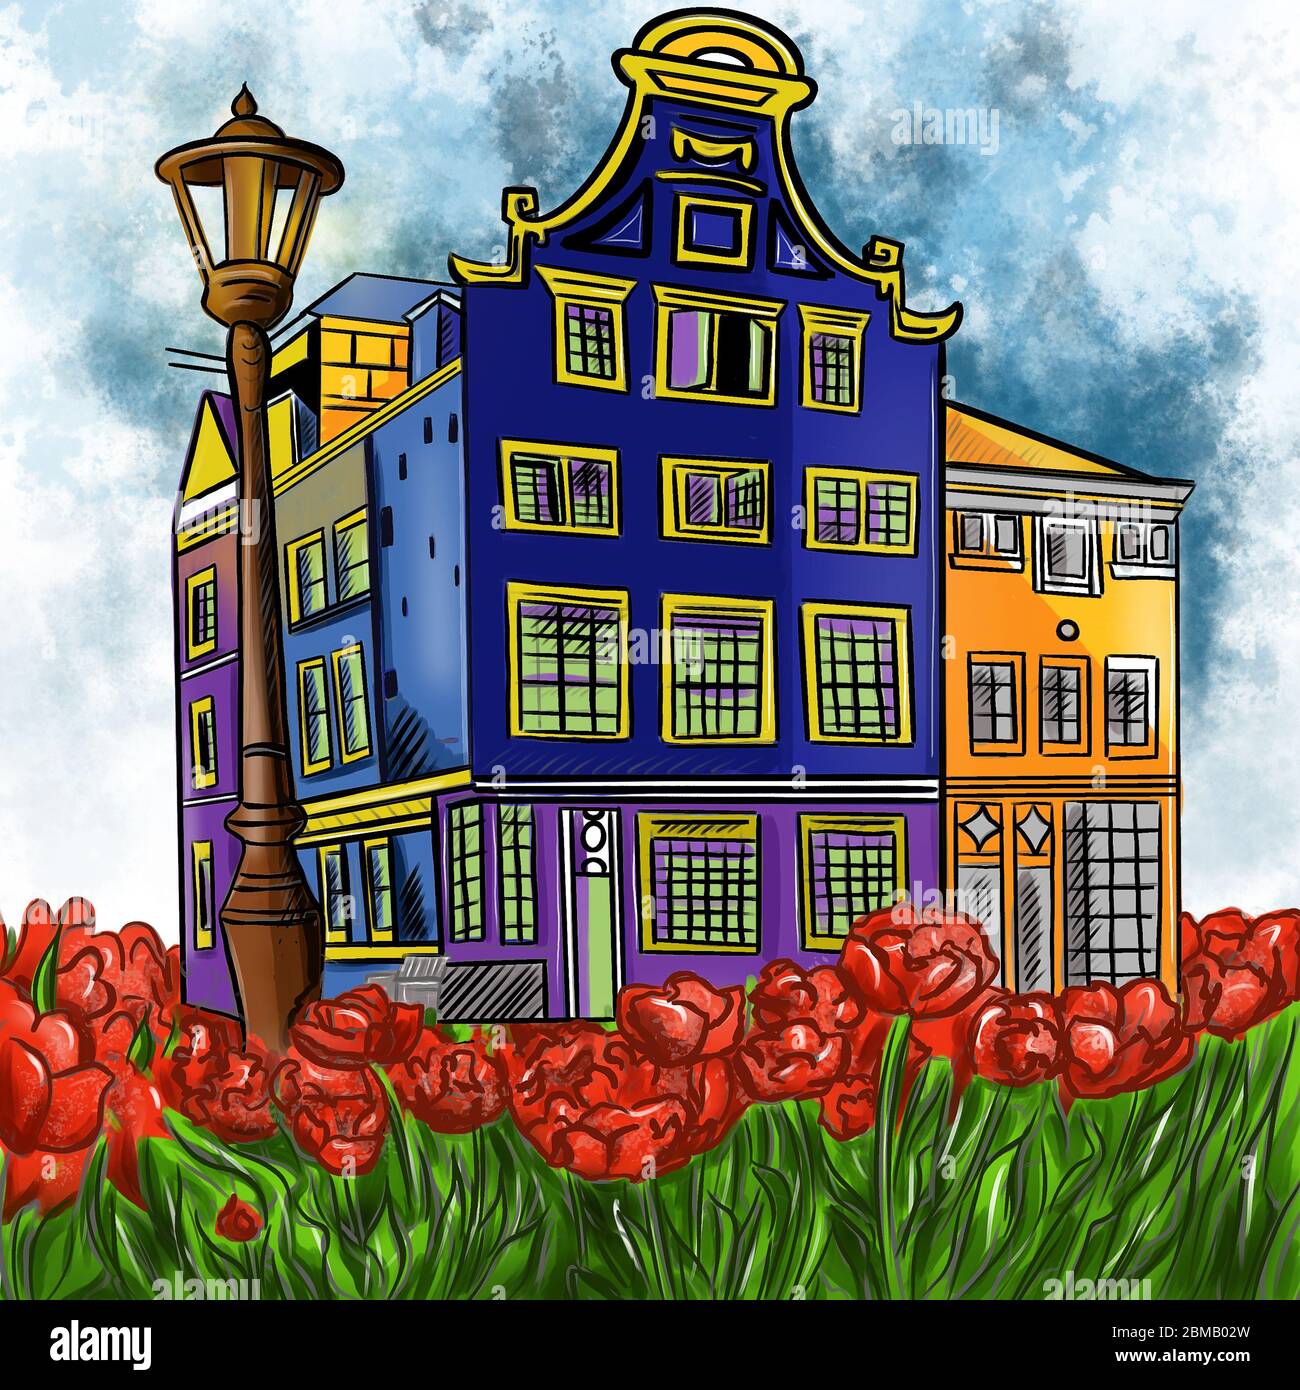 Illustration colored drawing of a multi-storey house in a vintage style in blue on a background of clouds and red tulips. Stock Photo